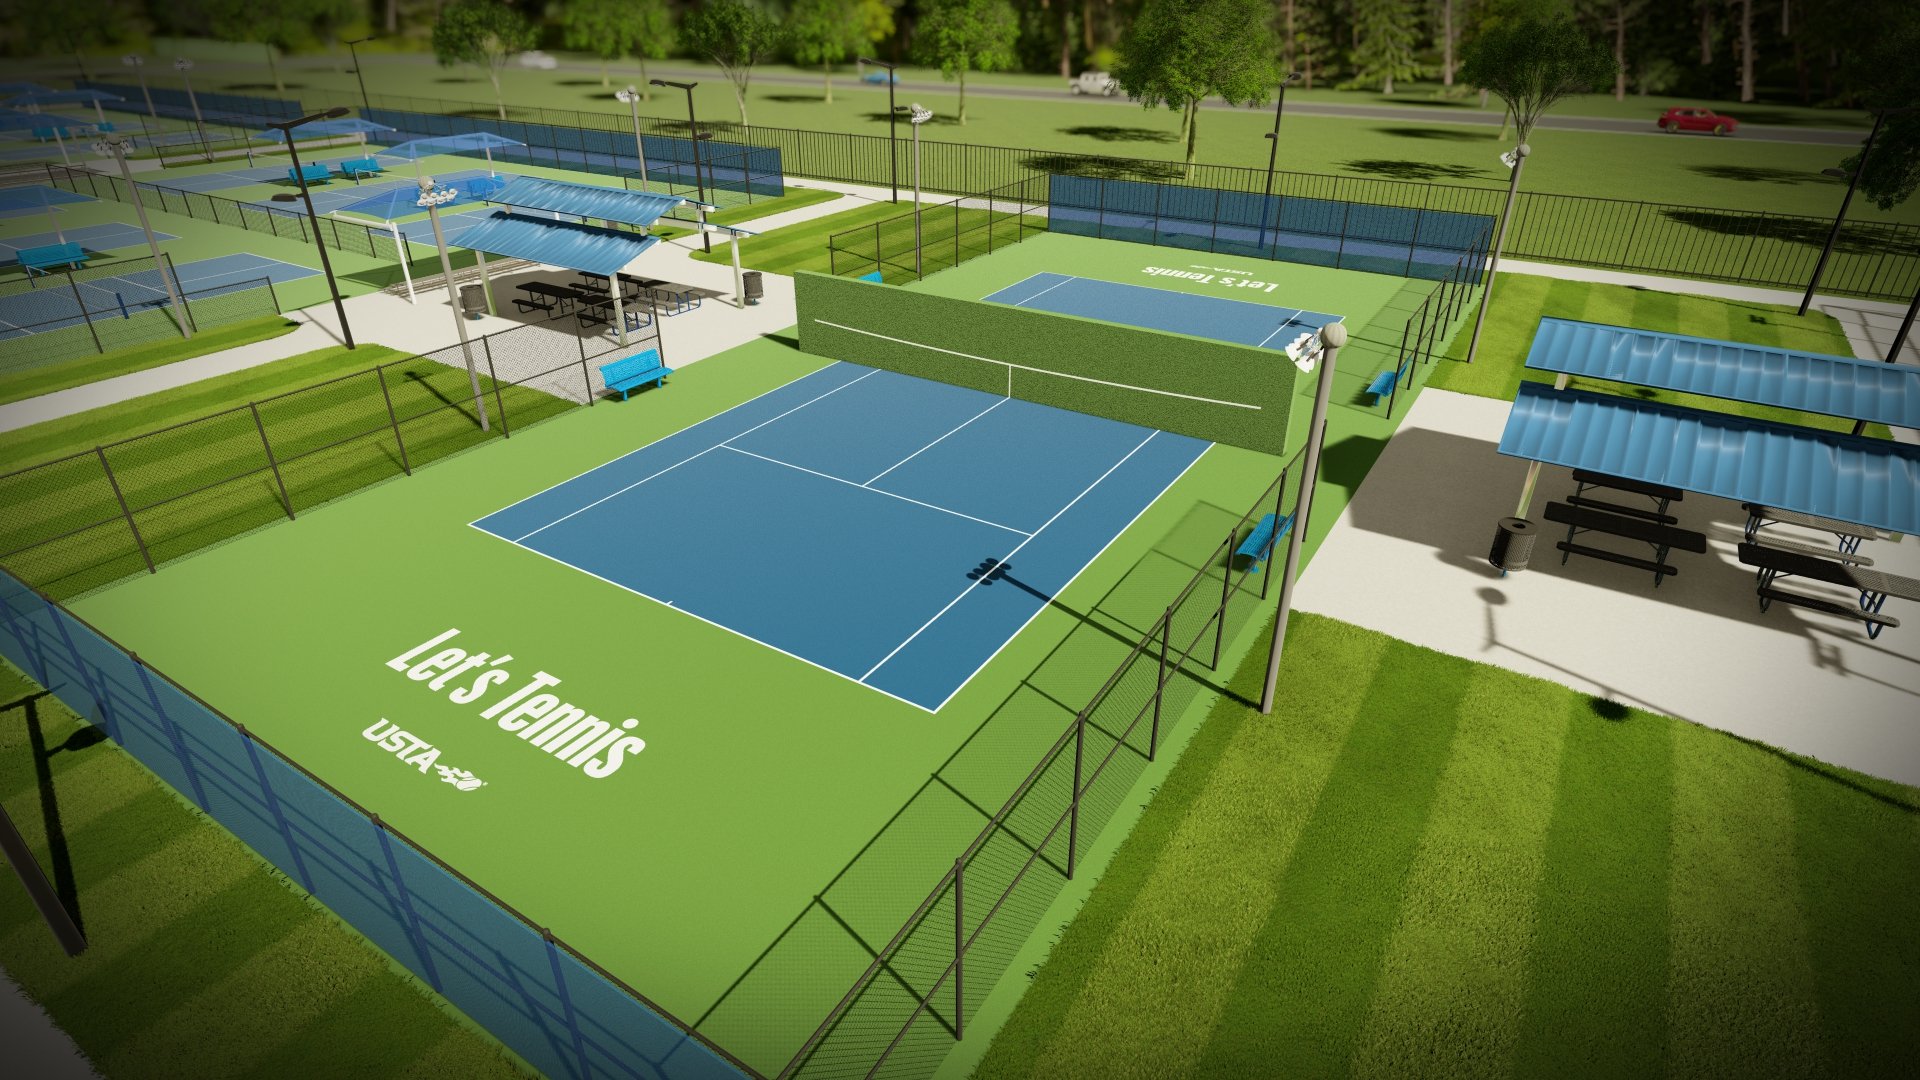 USTA Tennis Facility in partnership with IMPACT Parks